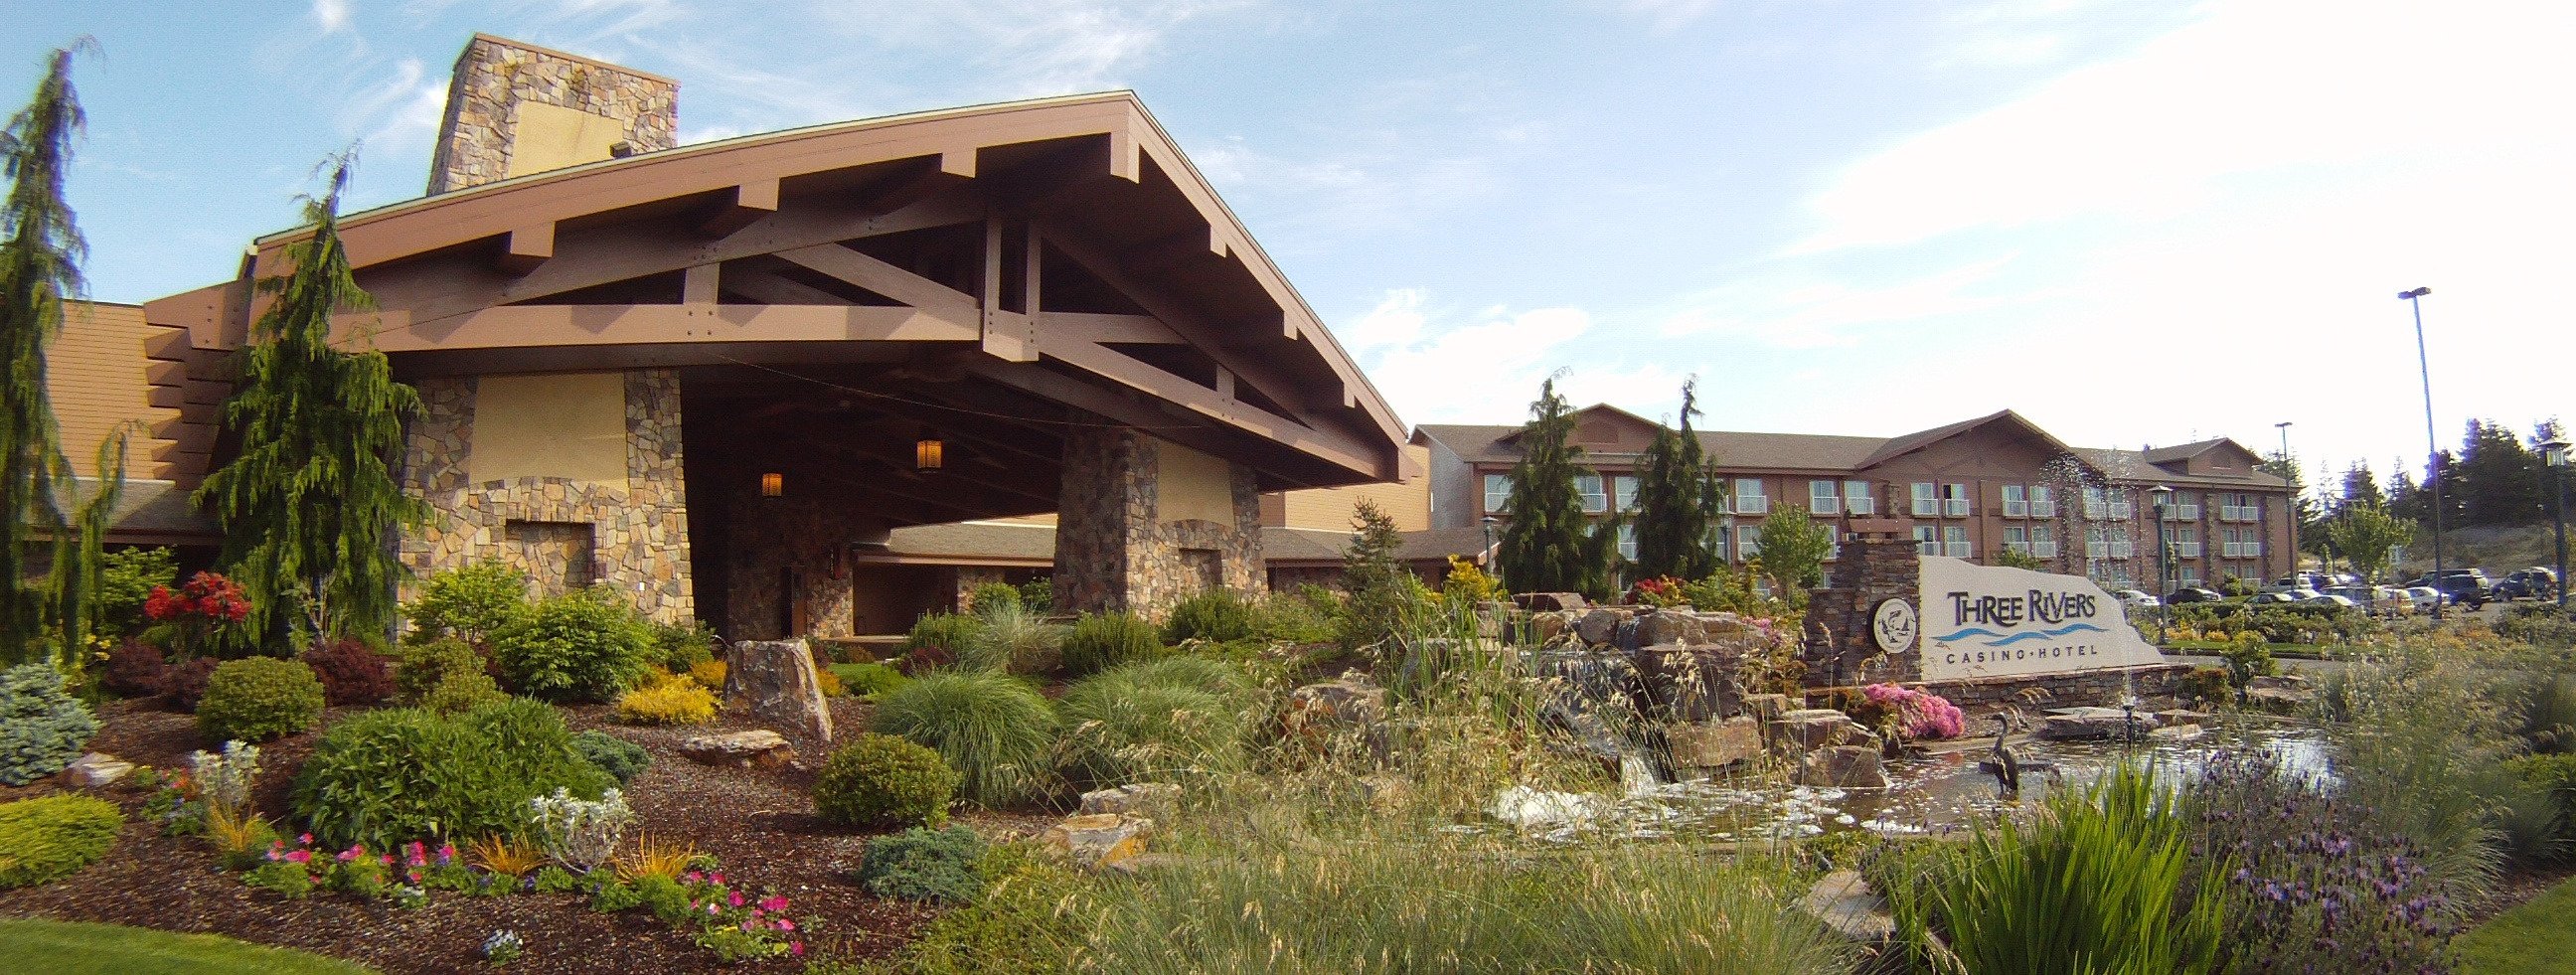 clearwater river casino and resort